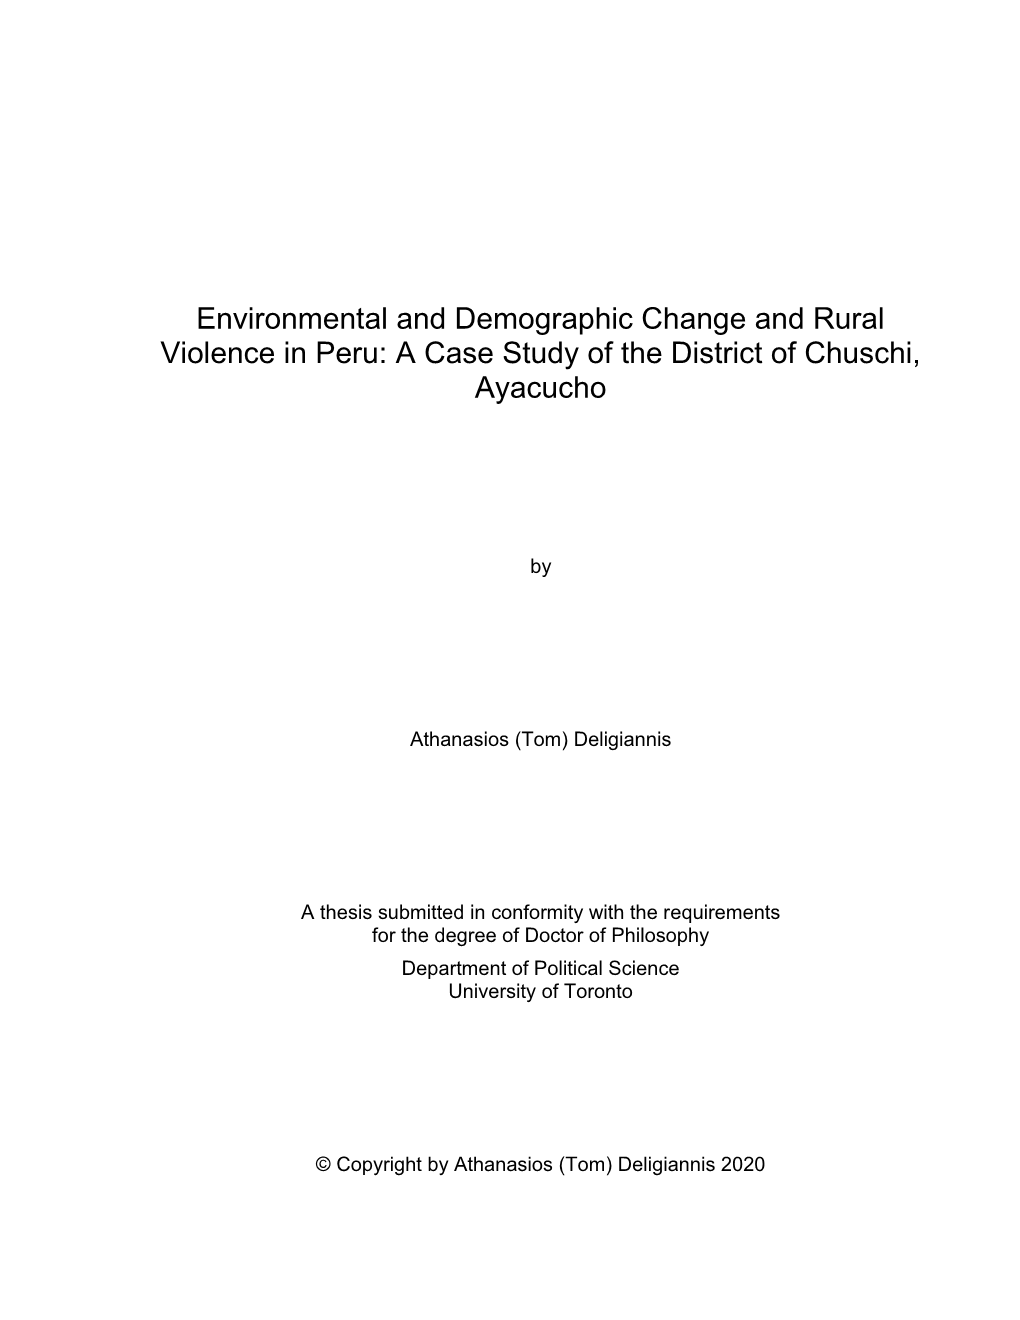 Environmental and Demographic Change and Rural Violence in Peru: a Case Study of the District of Chuschi, Ayacucho